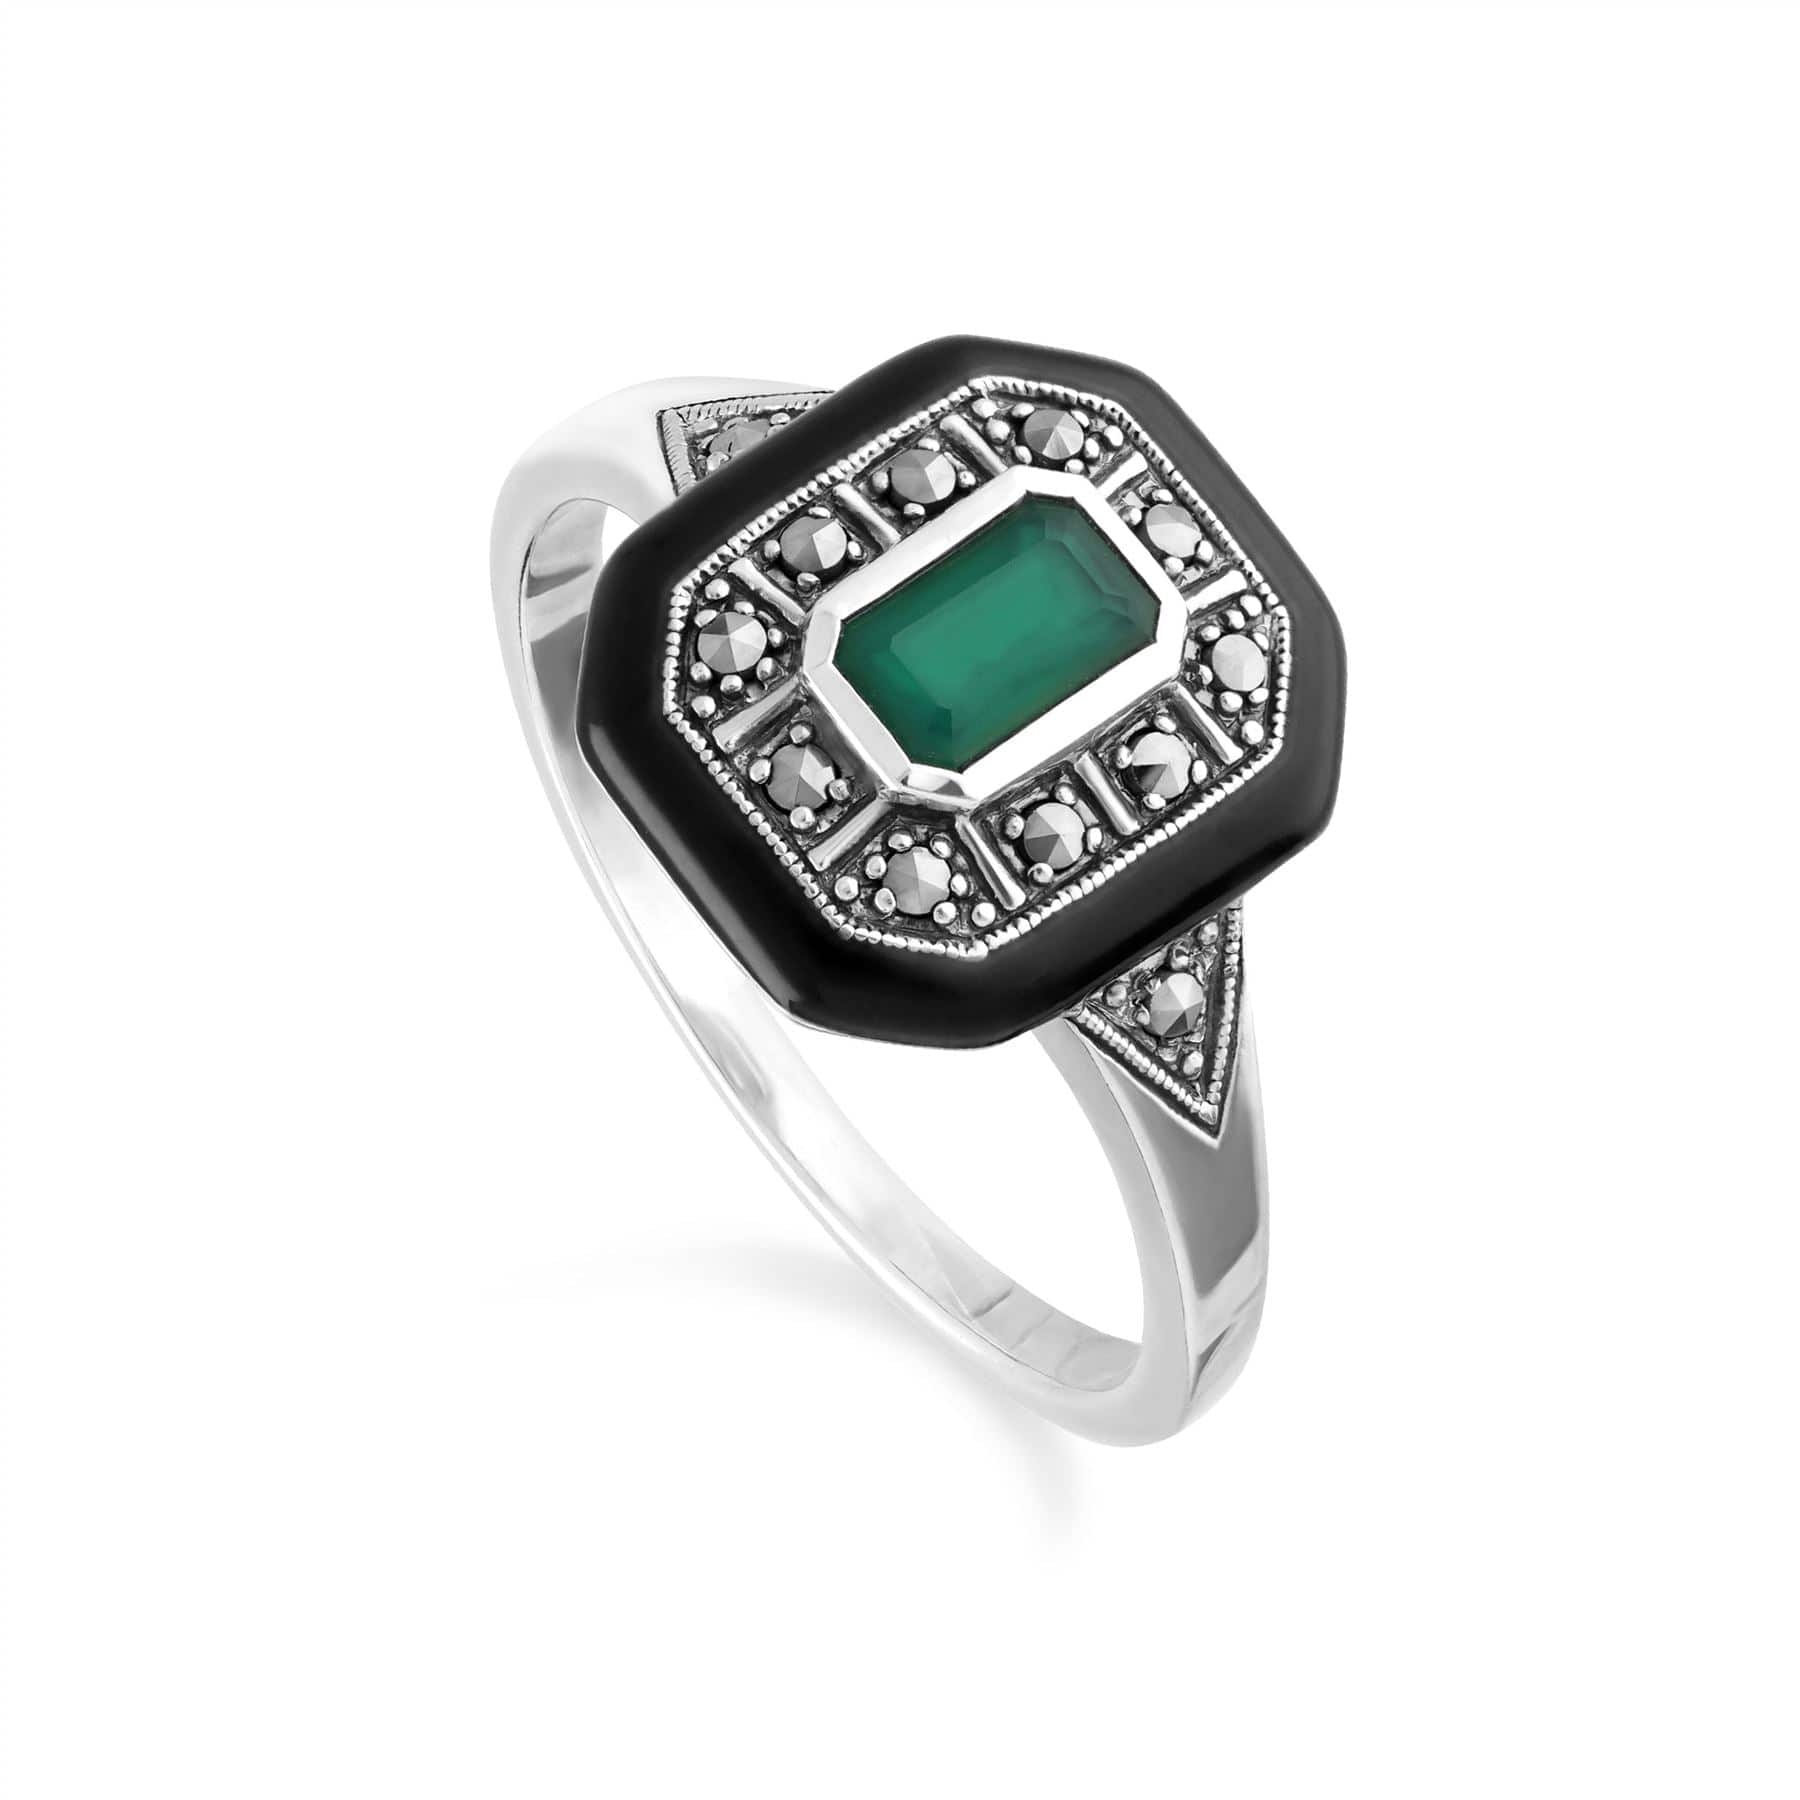 214R608001925 Art Deco Inspired Chalcedony, Enamel & Marcasite Square Ring In Sterling Silver 1